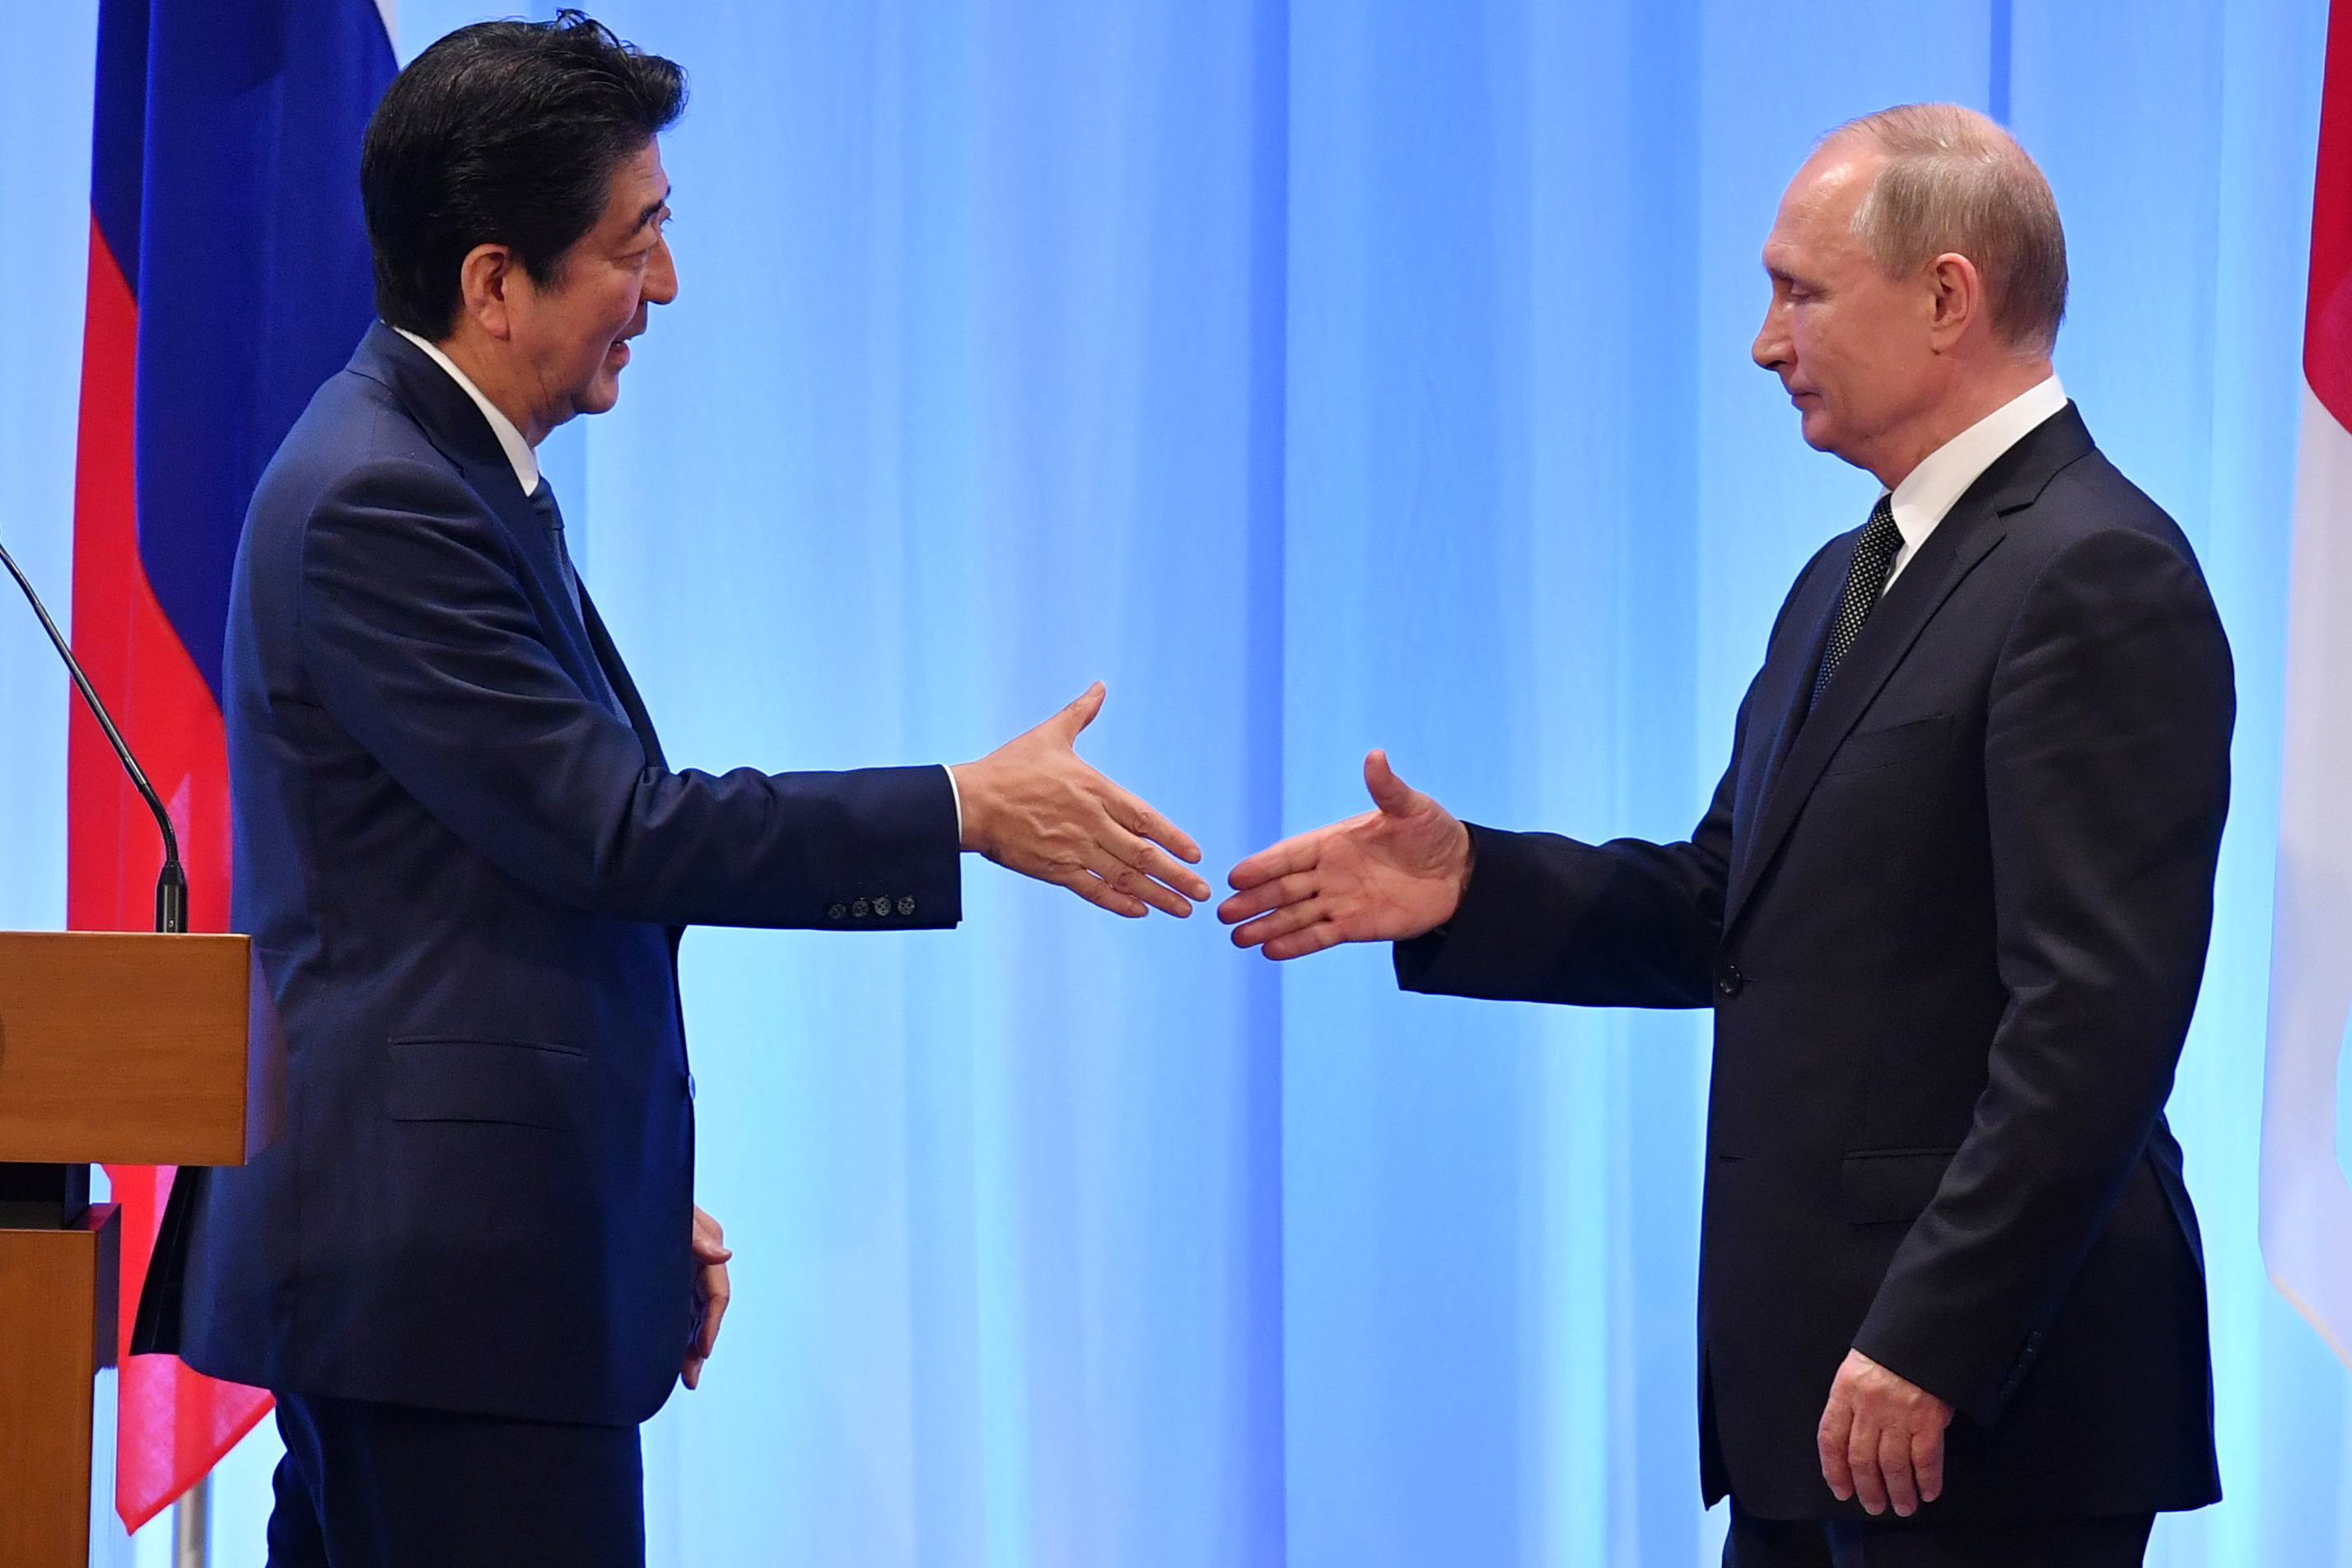 Prime Minister Shinzo Abe meets with Russian President Vladimir Putin at the Group of 20 Summit in Osaka in June 2019. It's time for Tokyo to acknowledge Moscow’s behavior for what it has always been: empty rhetoric, tactical tricks and bullying. | POOL VIA / REUTERS